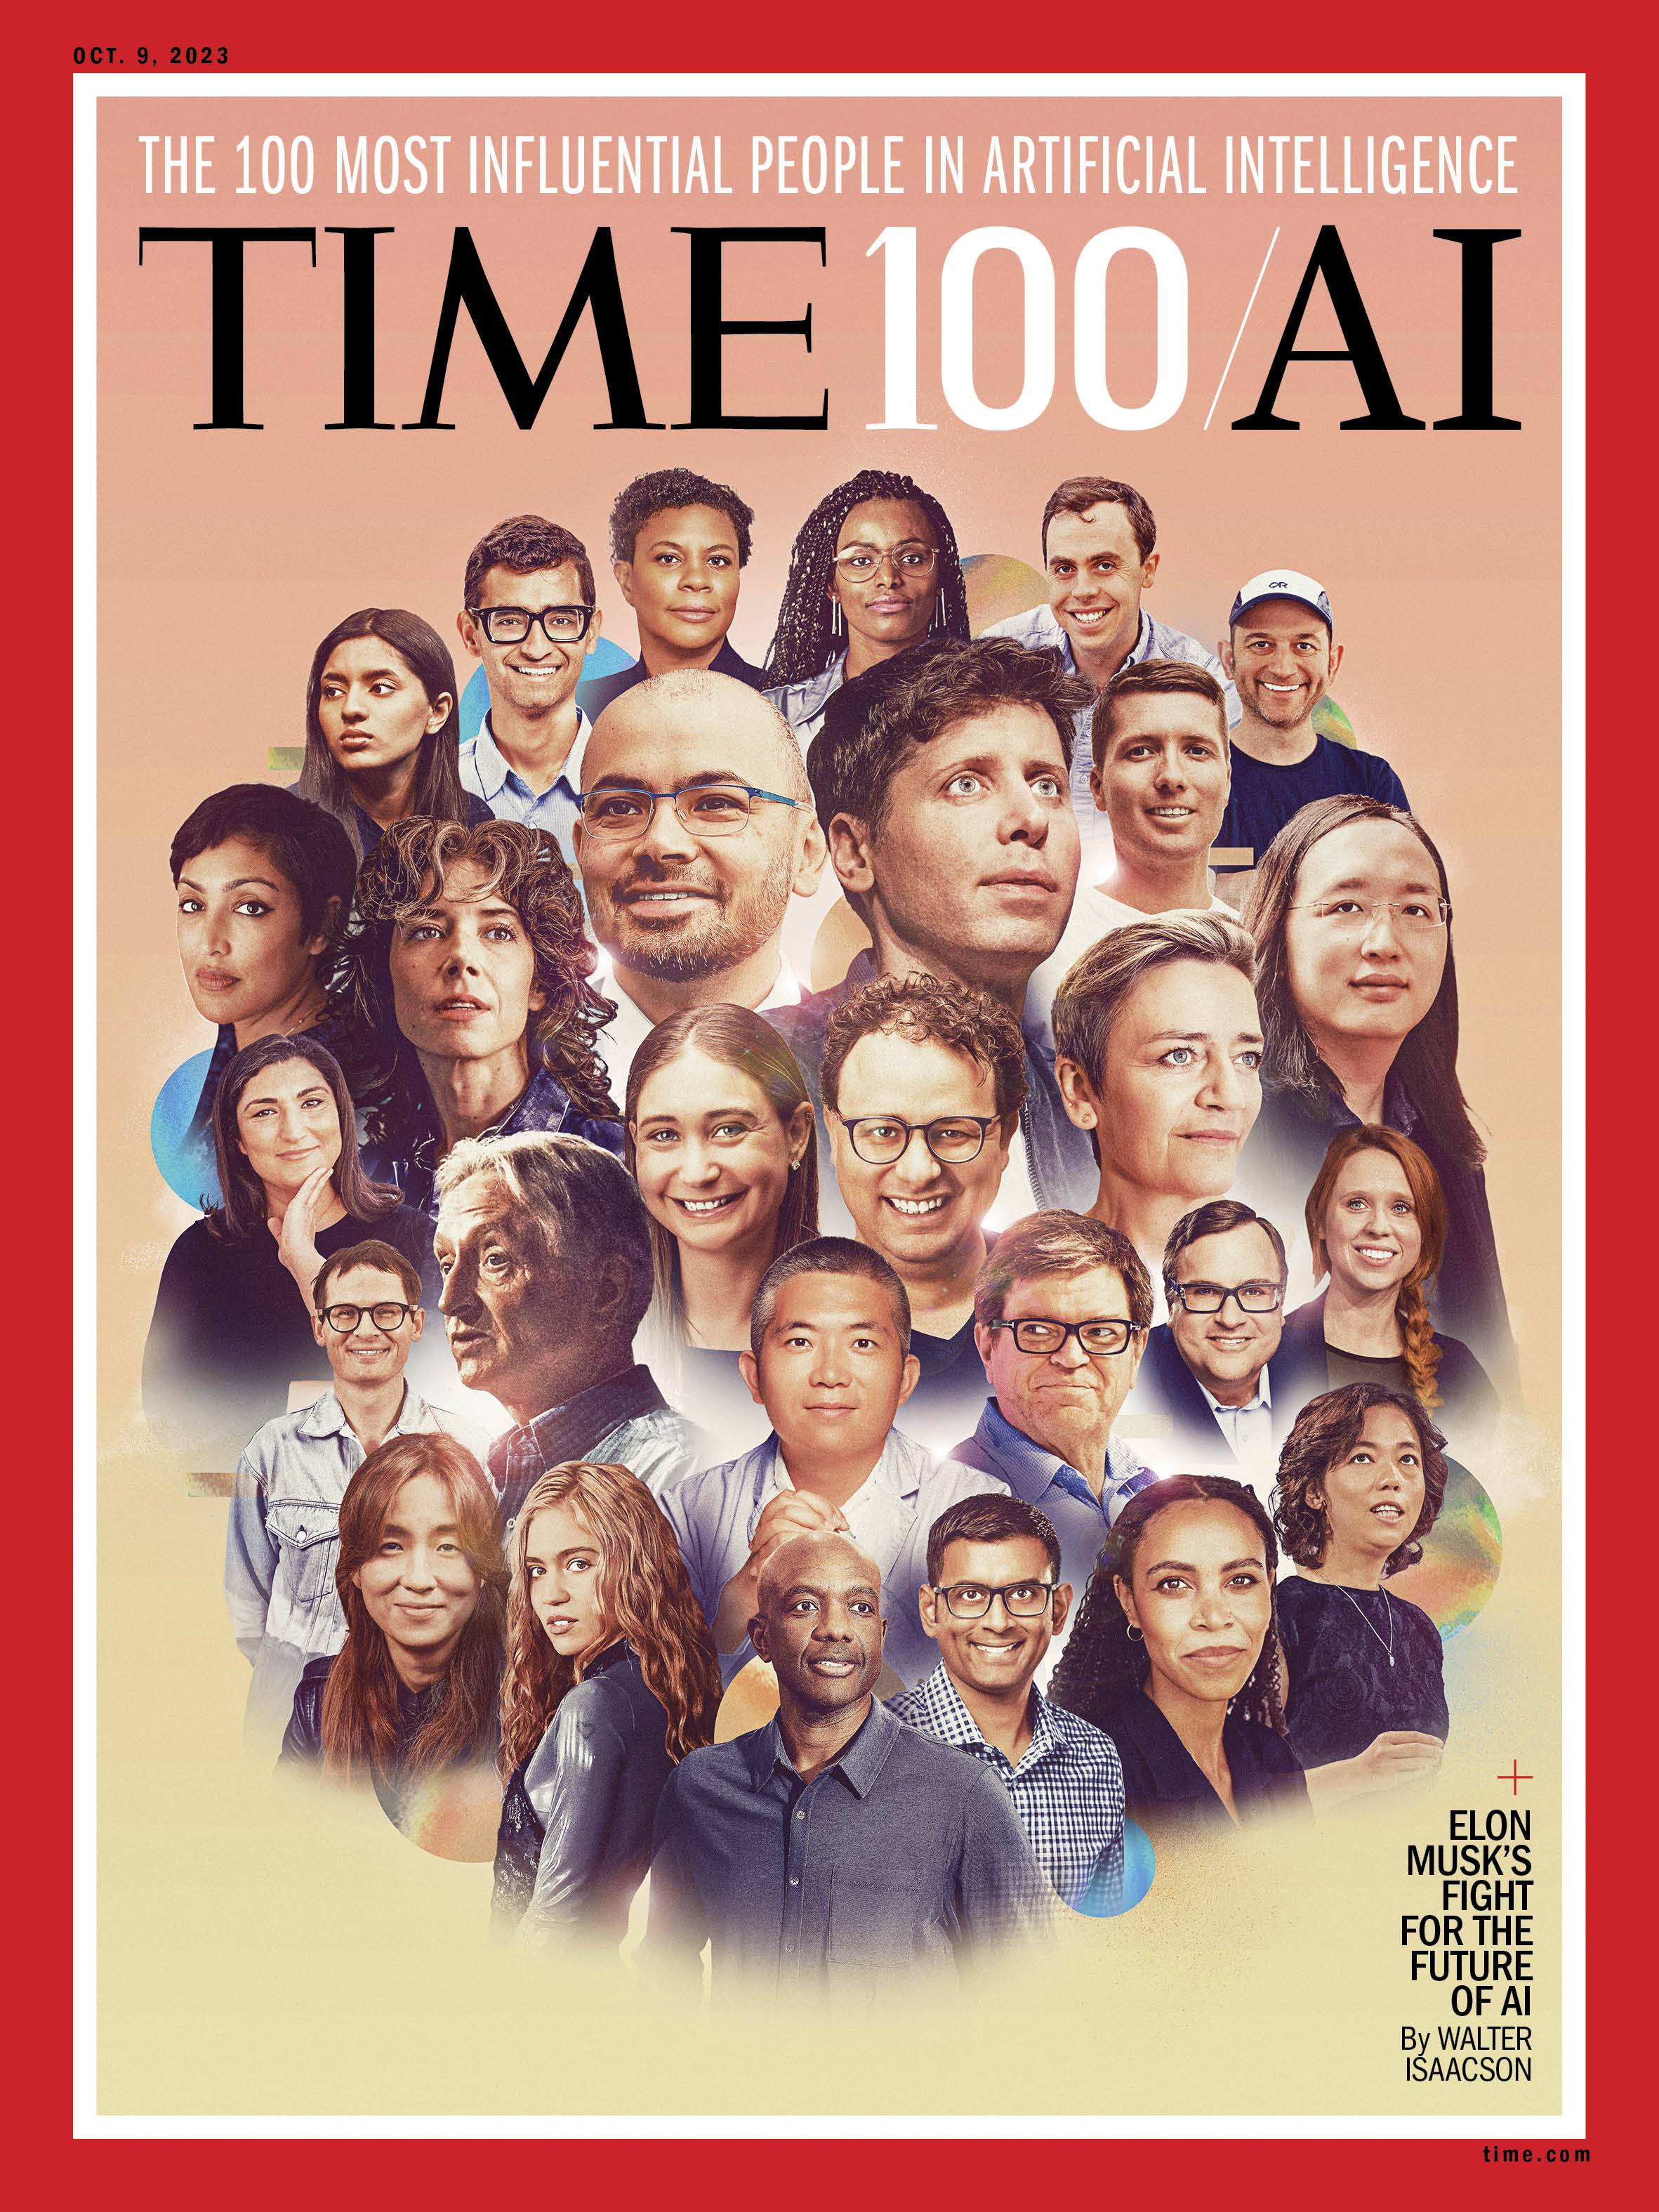 TIME Magazine's TIME100 artificial intelligence list honors six Princetonians